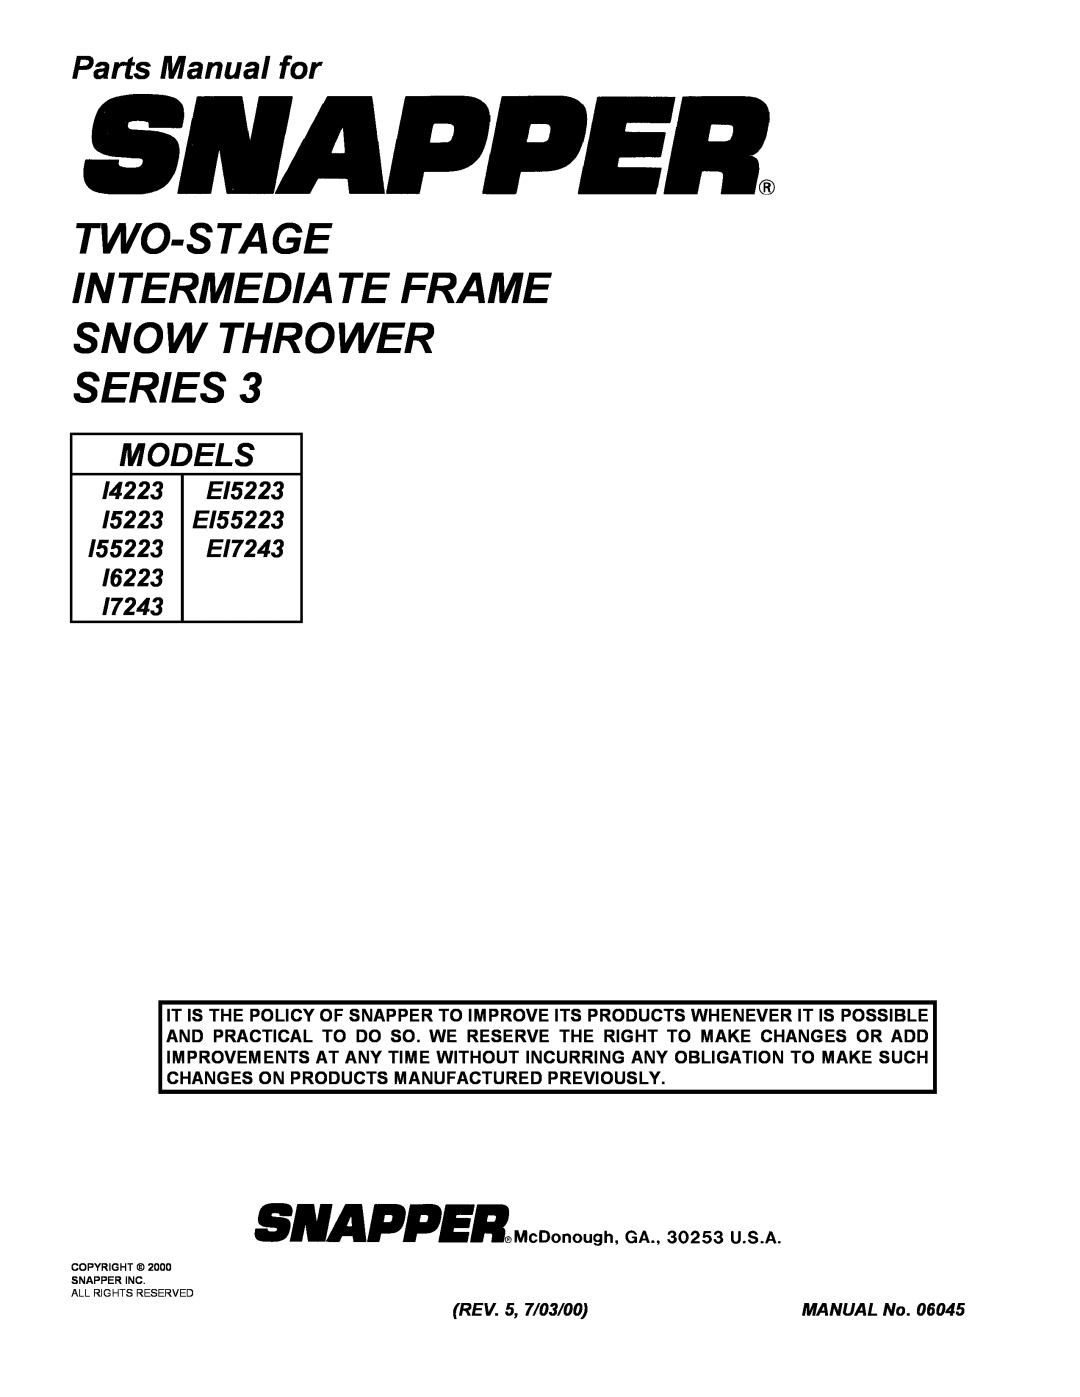 Snapper I7243 manual Two-Stage Intermediate Frame Snow Thrower Series, Parts Manual for, Models, REV. 5, 7/03/00, MANUAL No 